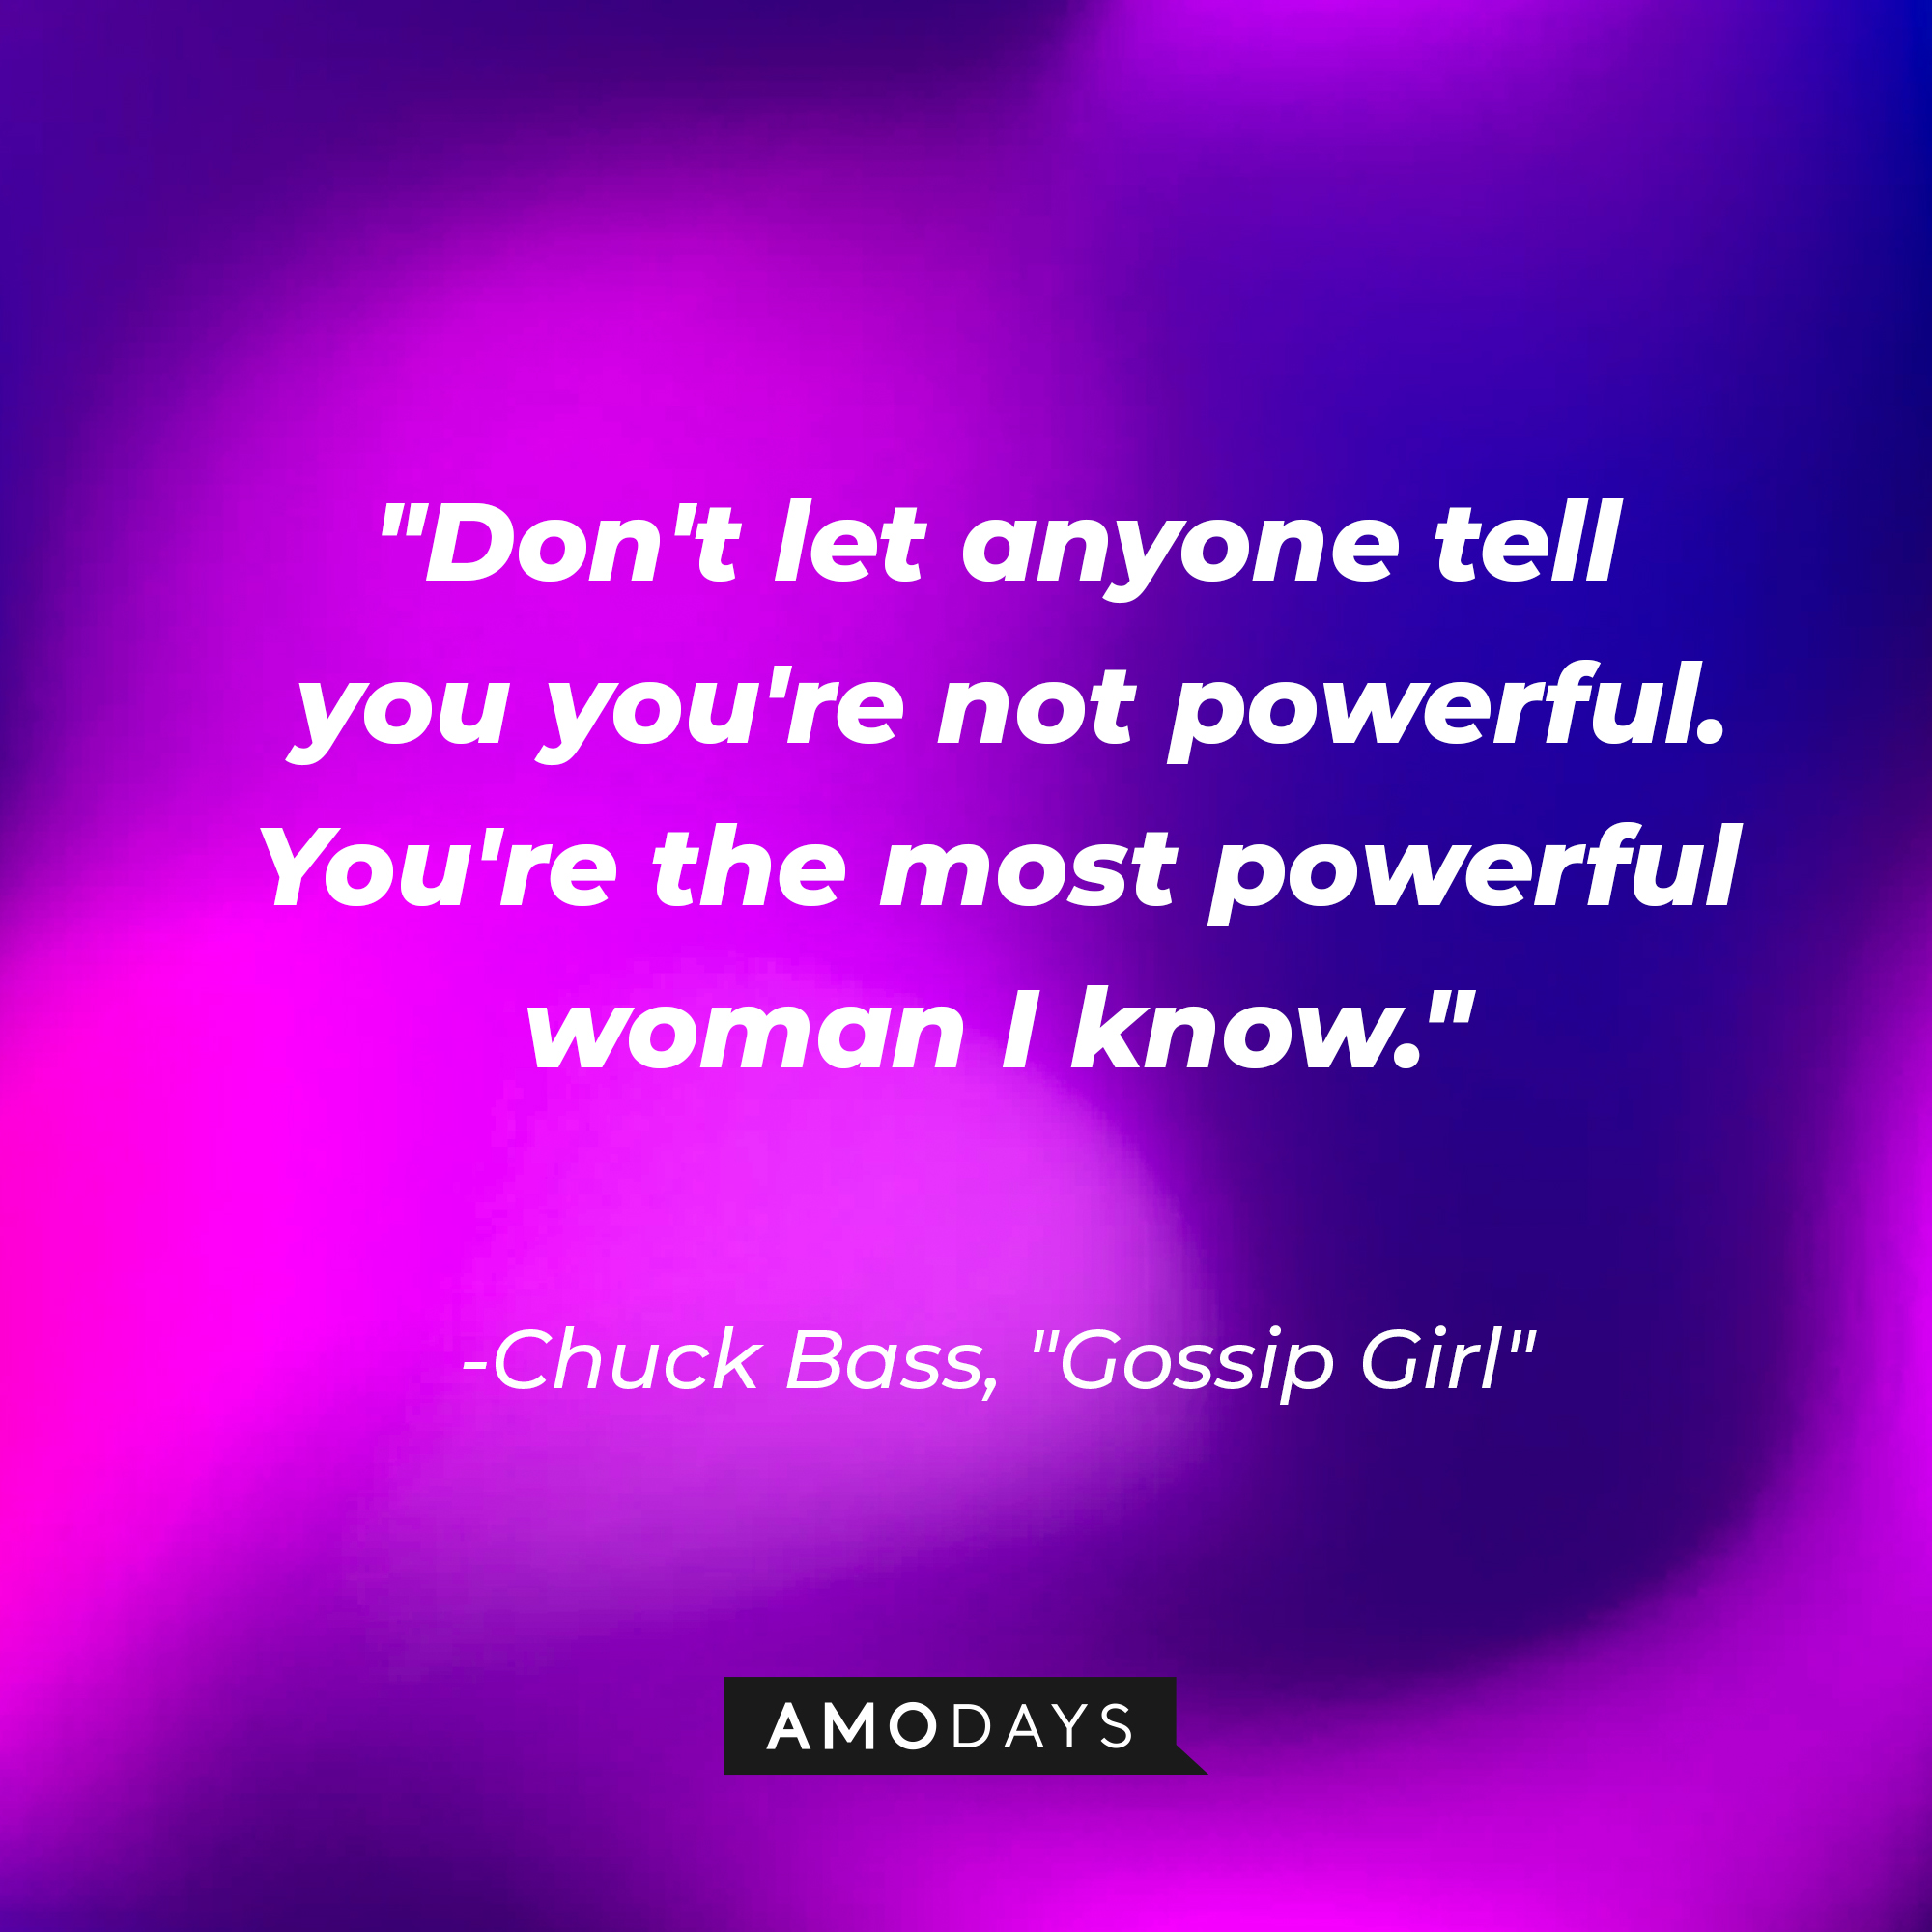 Chuck Bass' quote: "Don't let anyone tell you you're not powerful. You're the most powerful woman I know." | Source: AmoDays